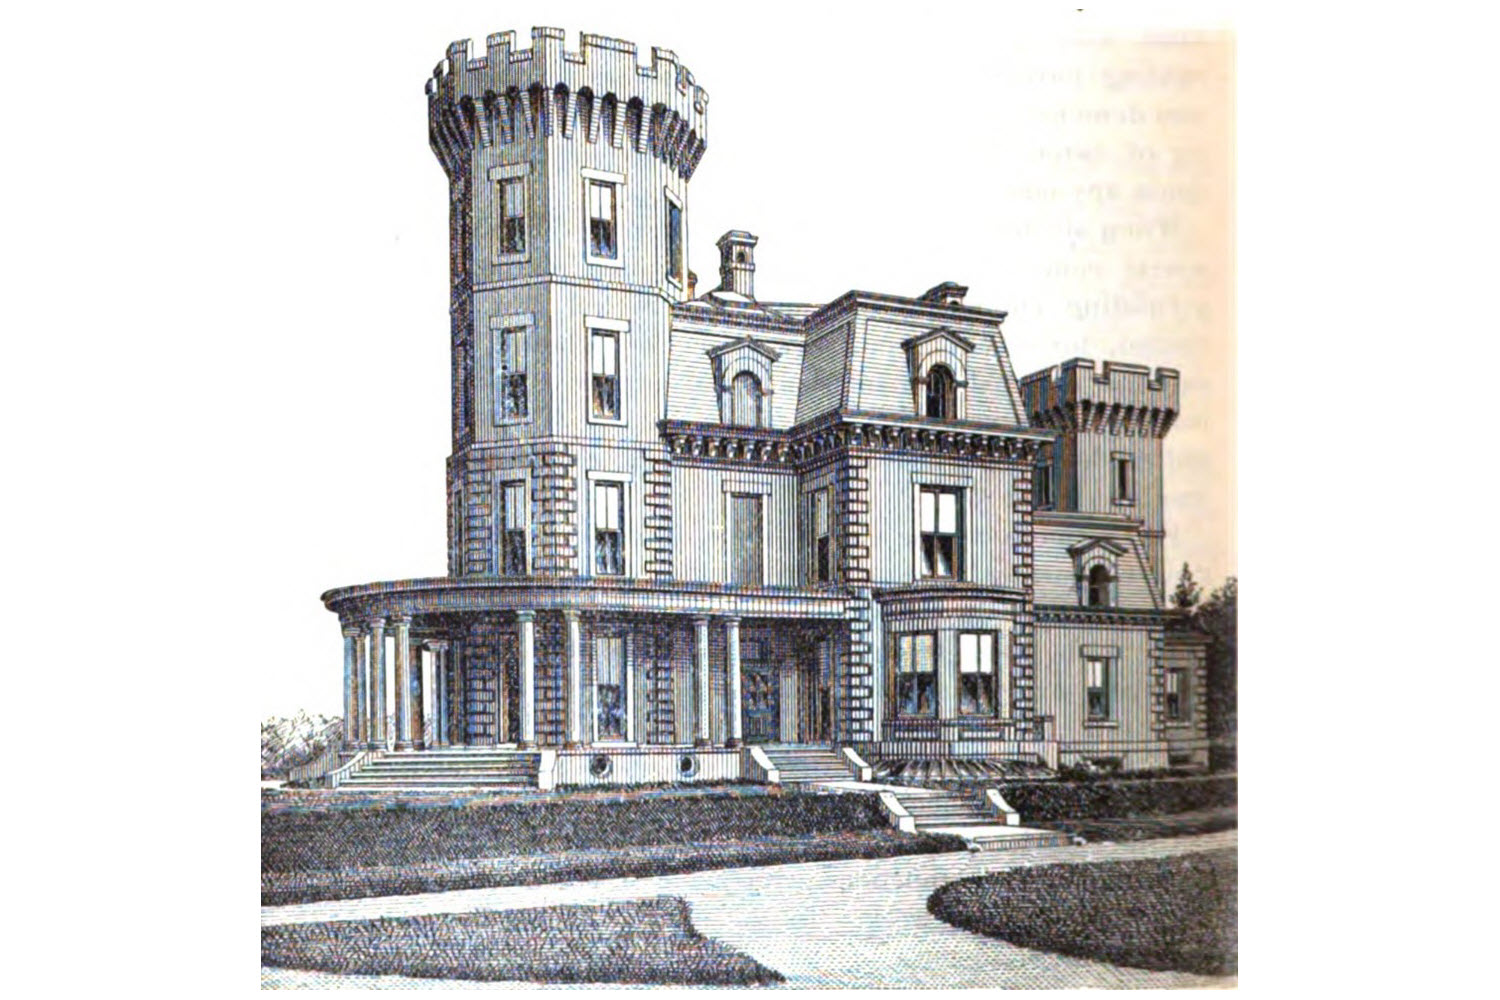 Illustration of the Ward House